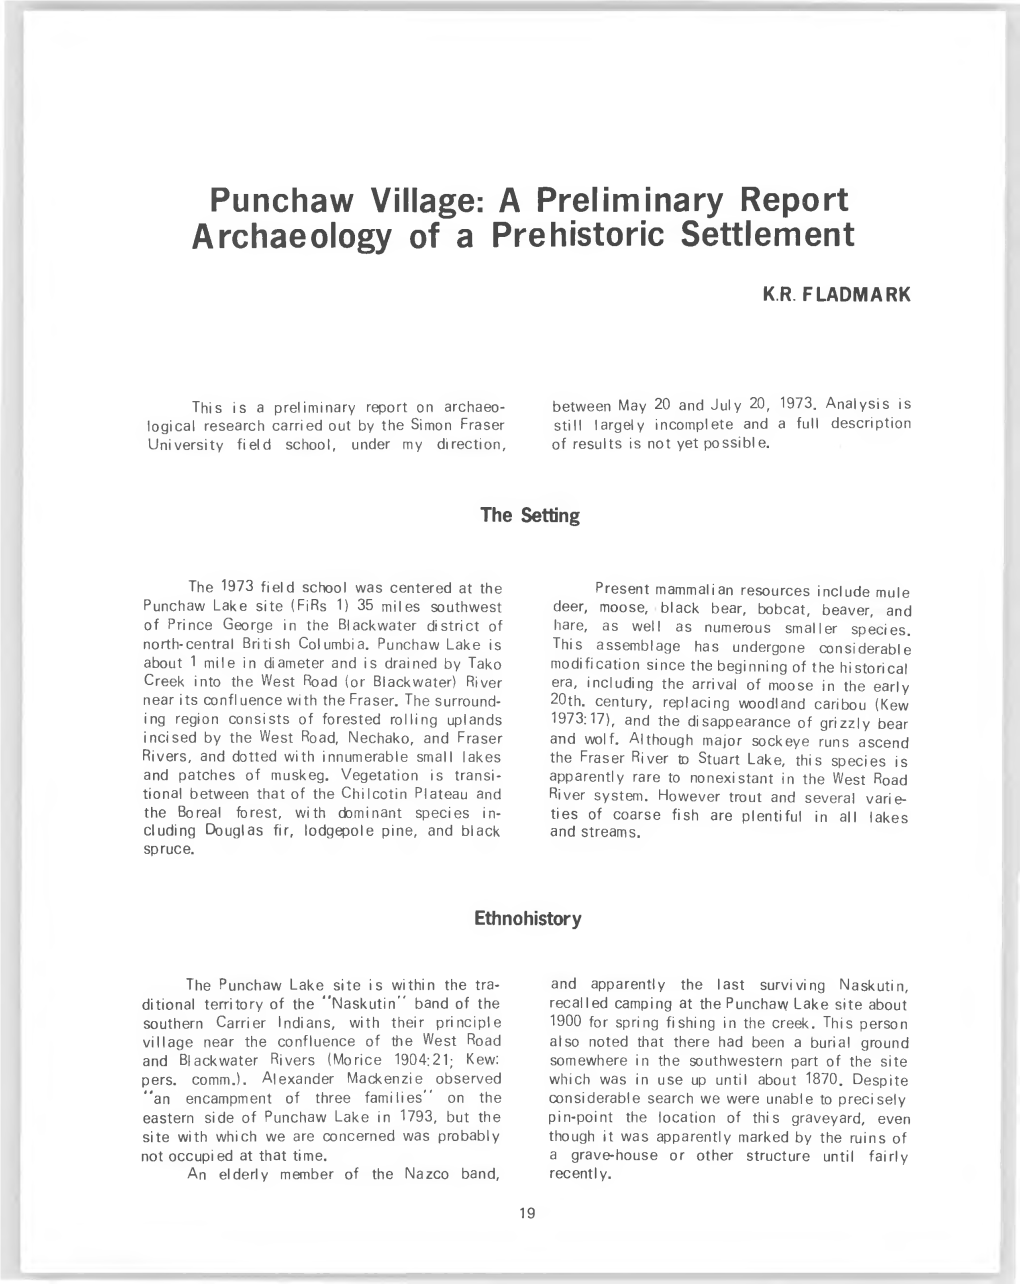 Punchaw Village: a Preliminary Report Archaeology of a Prehistoric Settlement